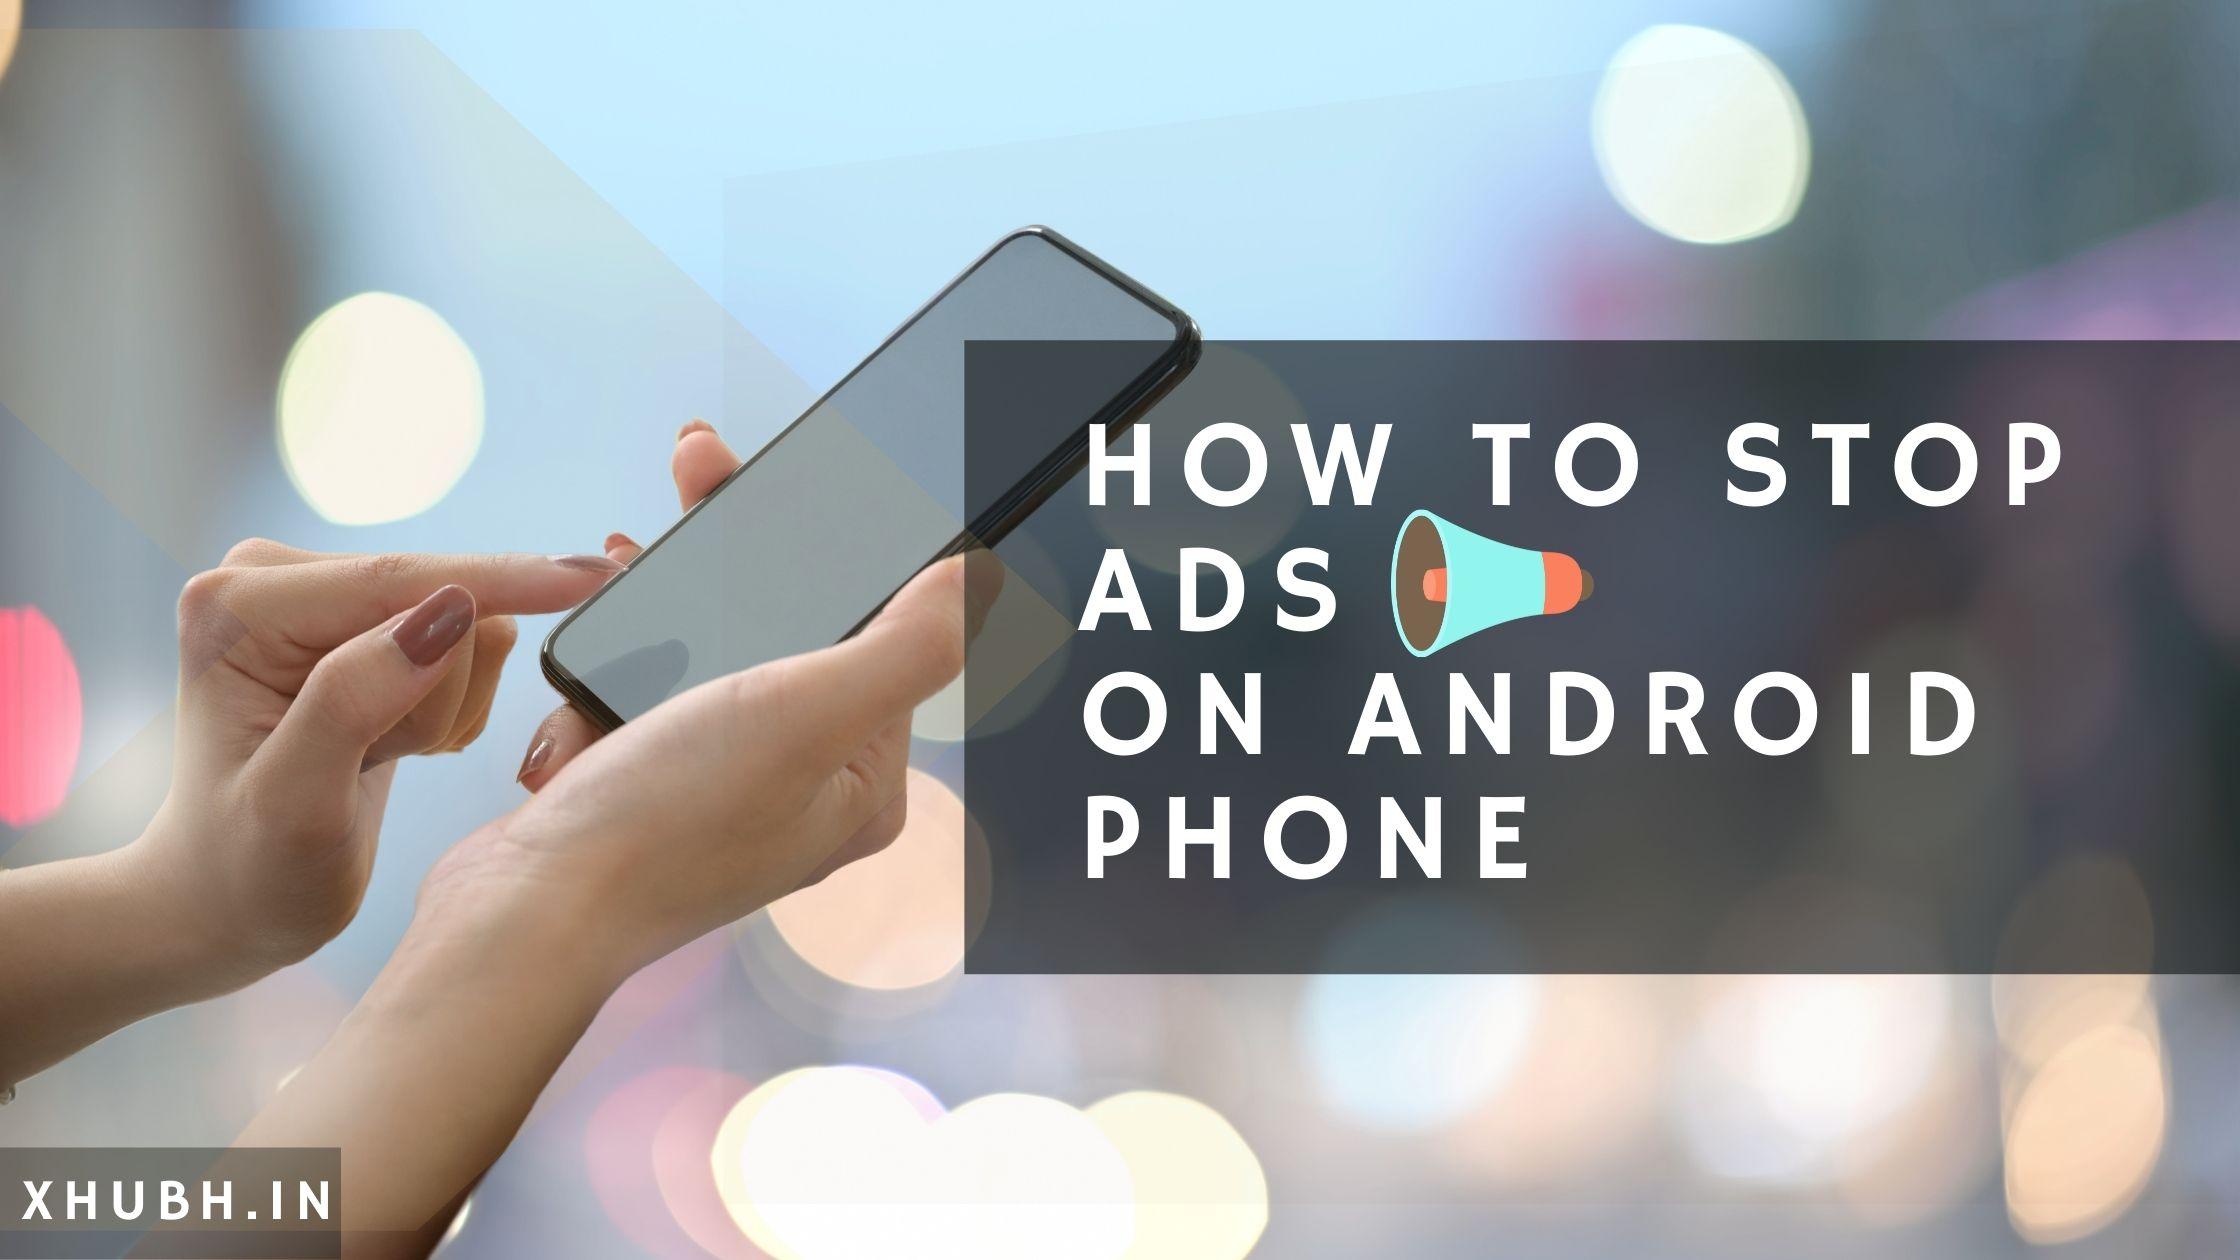 How To Stop Ads On Android Phone